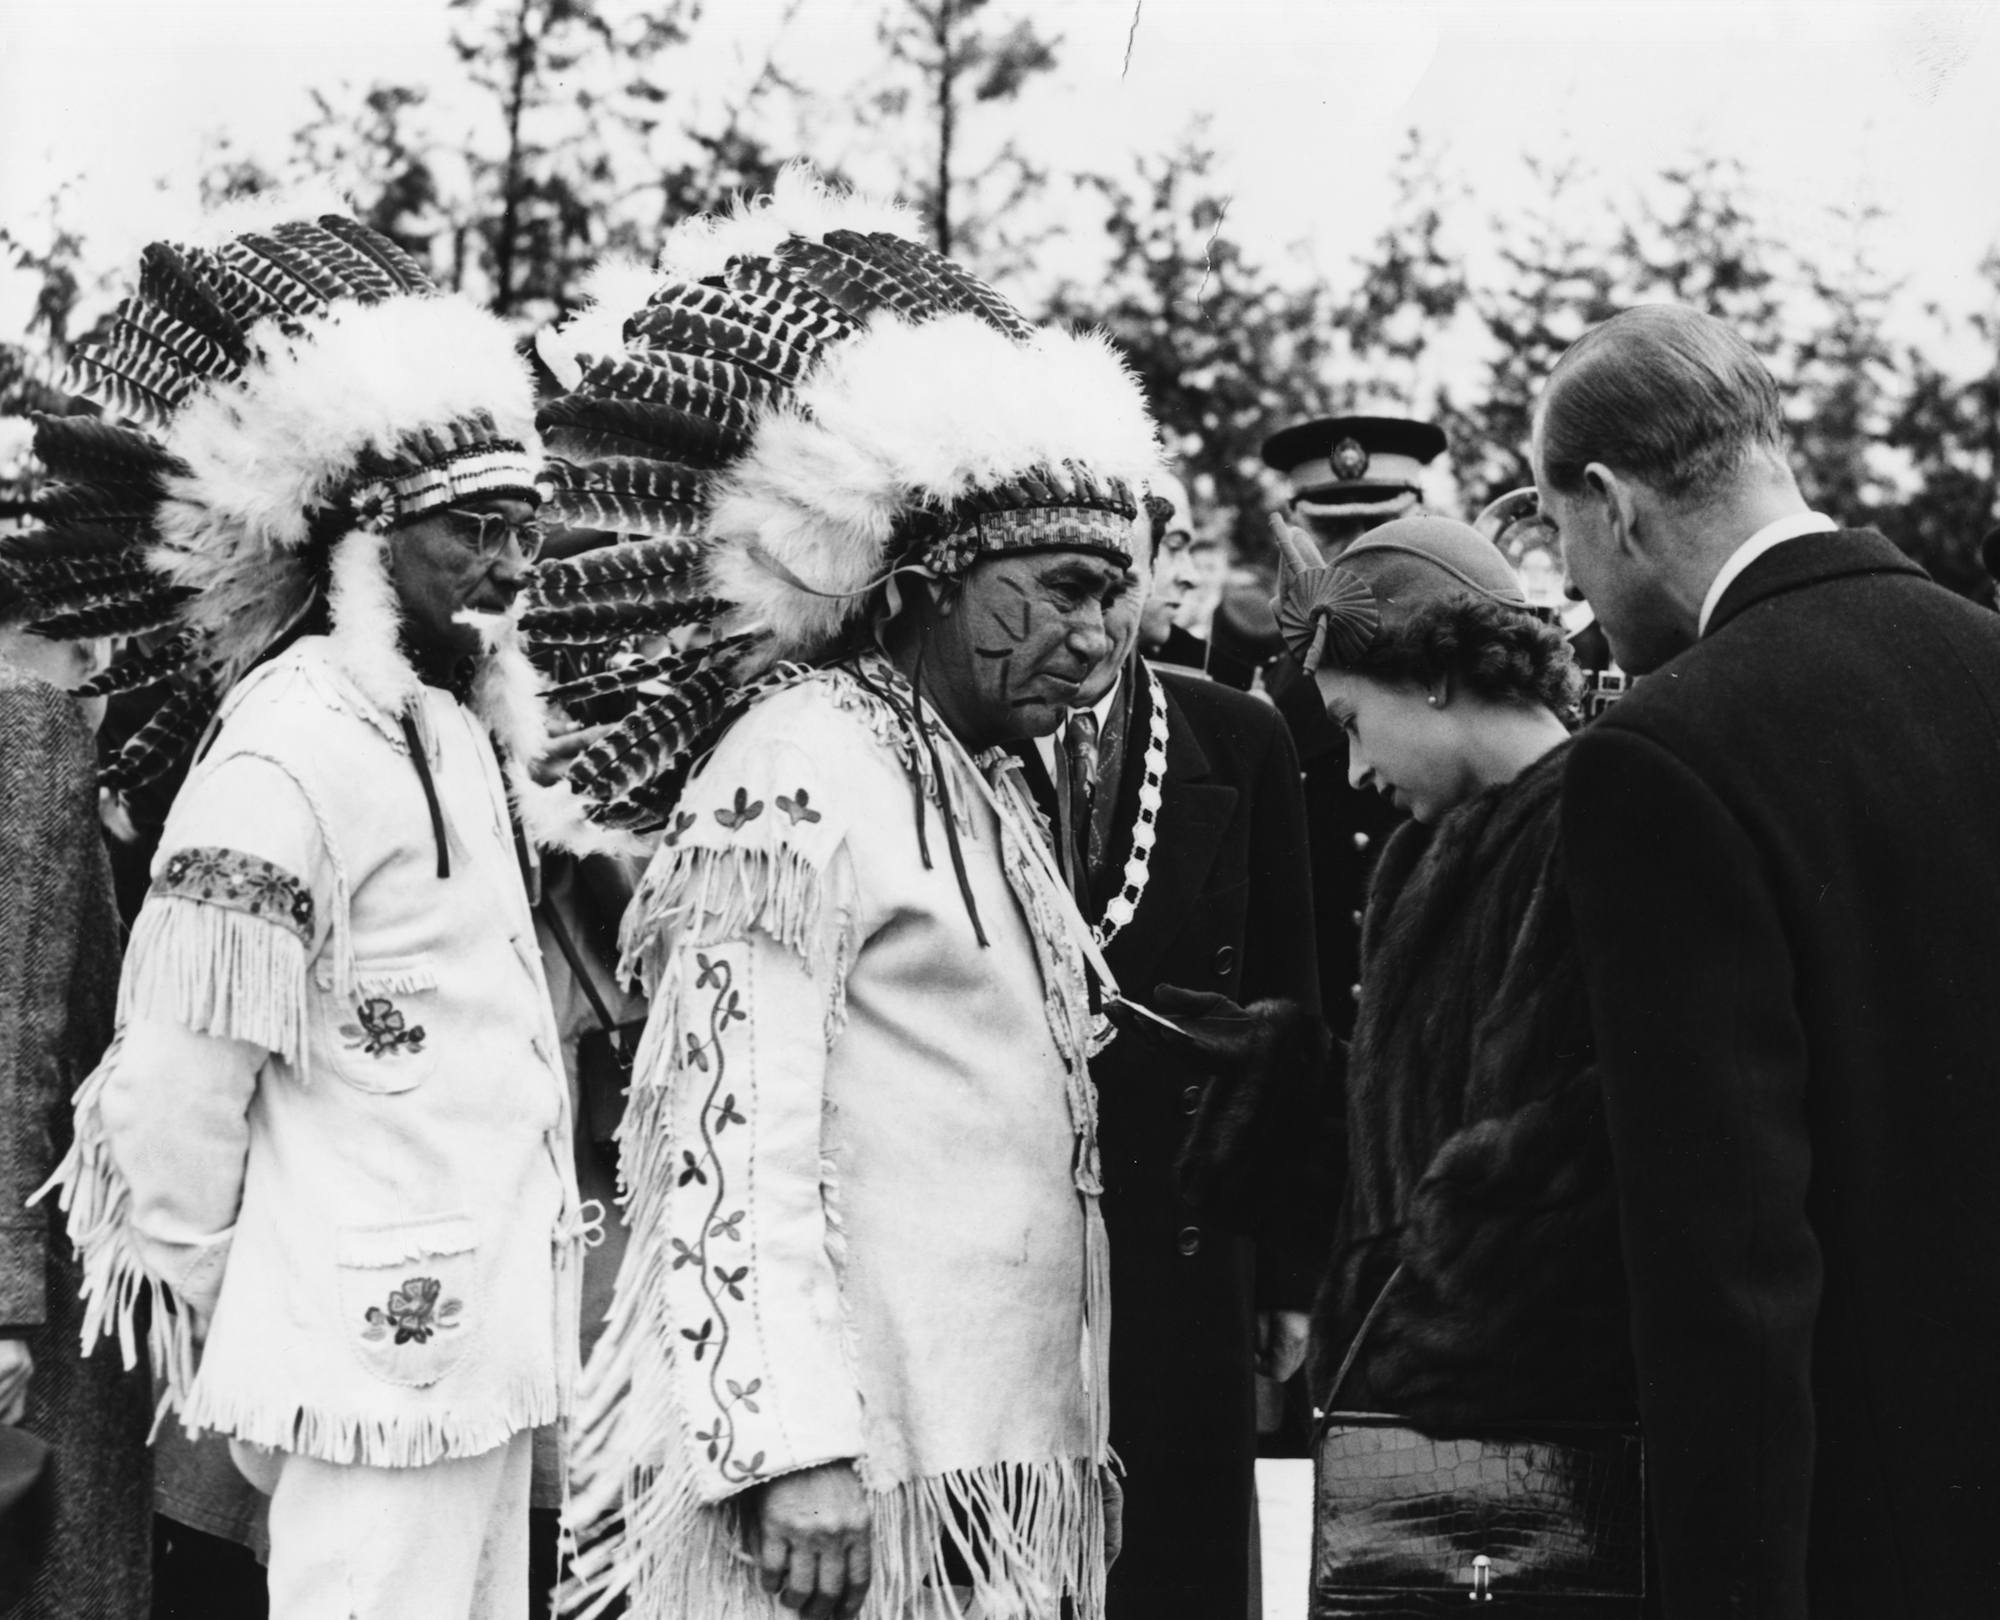 Princess Elizabeth and Prince Philip greet a group of Native American Chiefs at Fort William in Canada